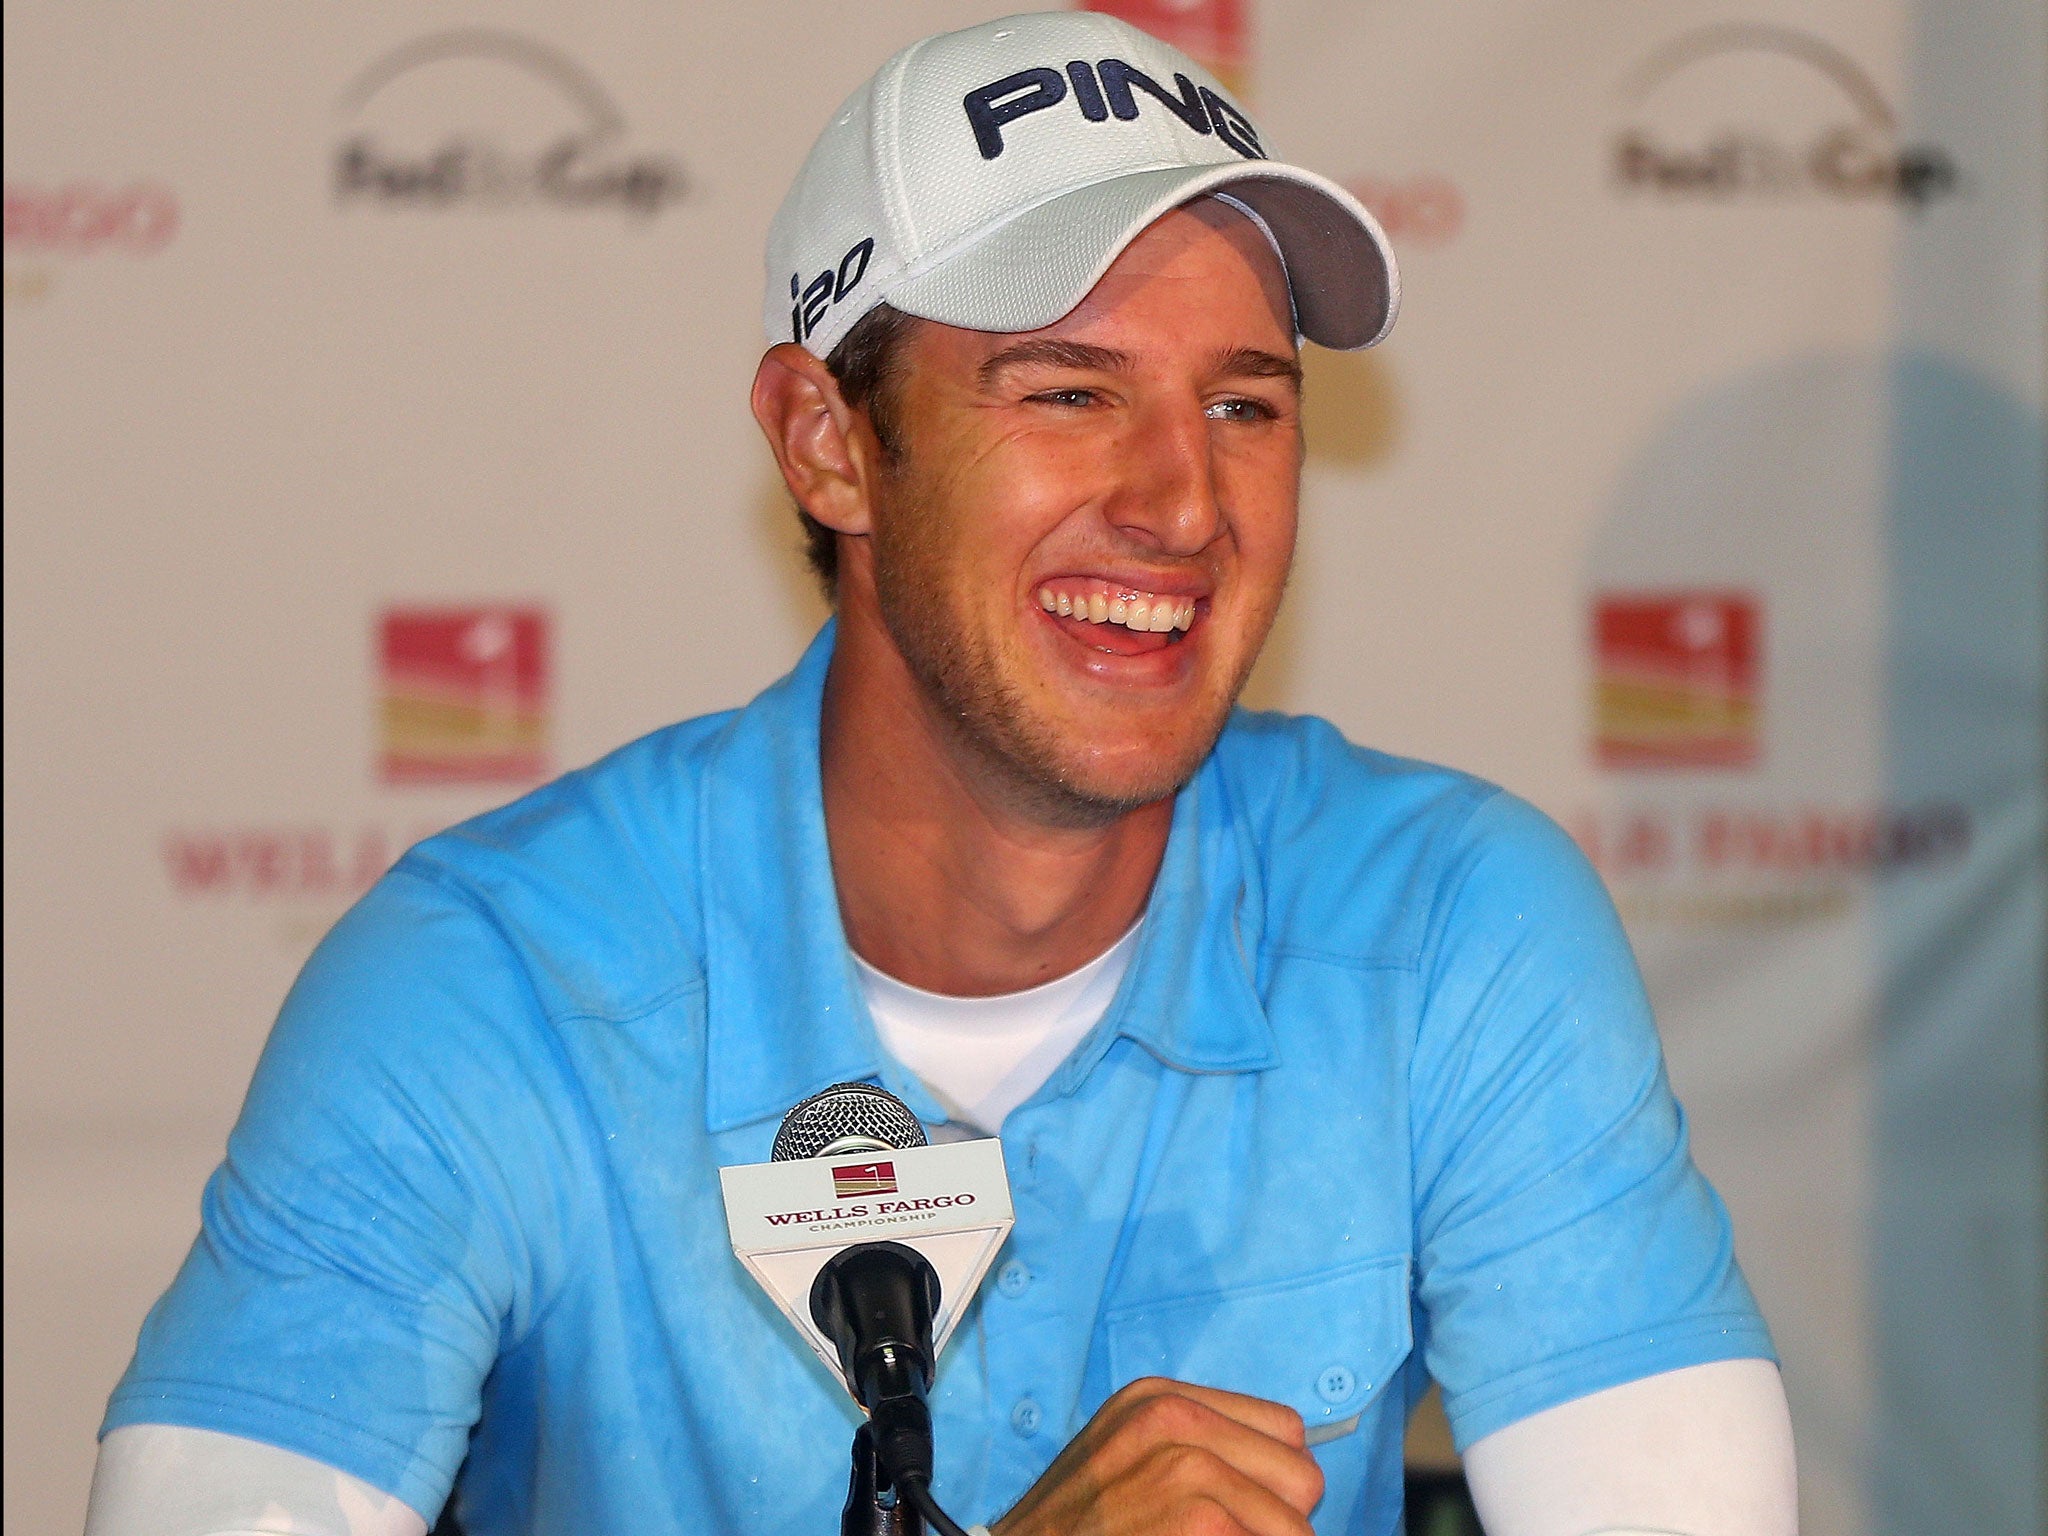 The American Derek Ernst has climbed 1,084 places up the world rankings after winning the Wells Fargo Championship